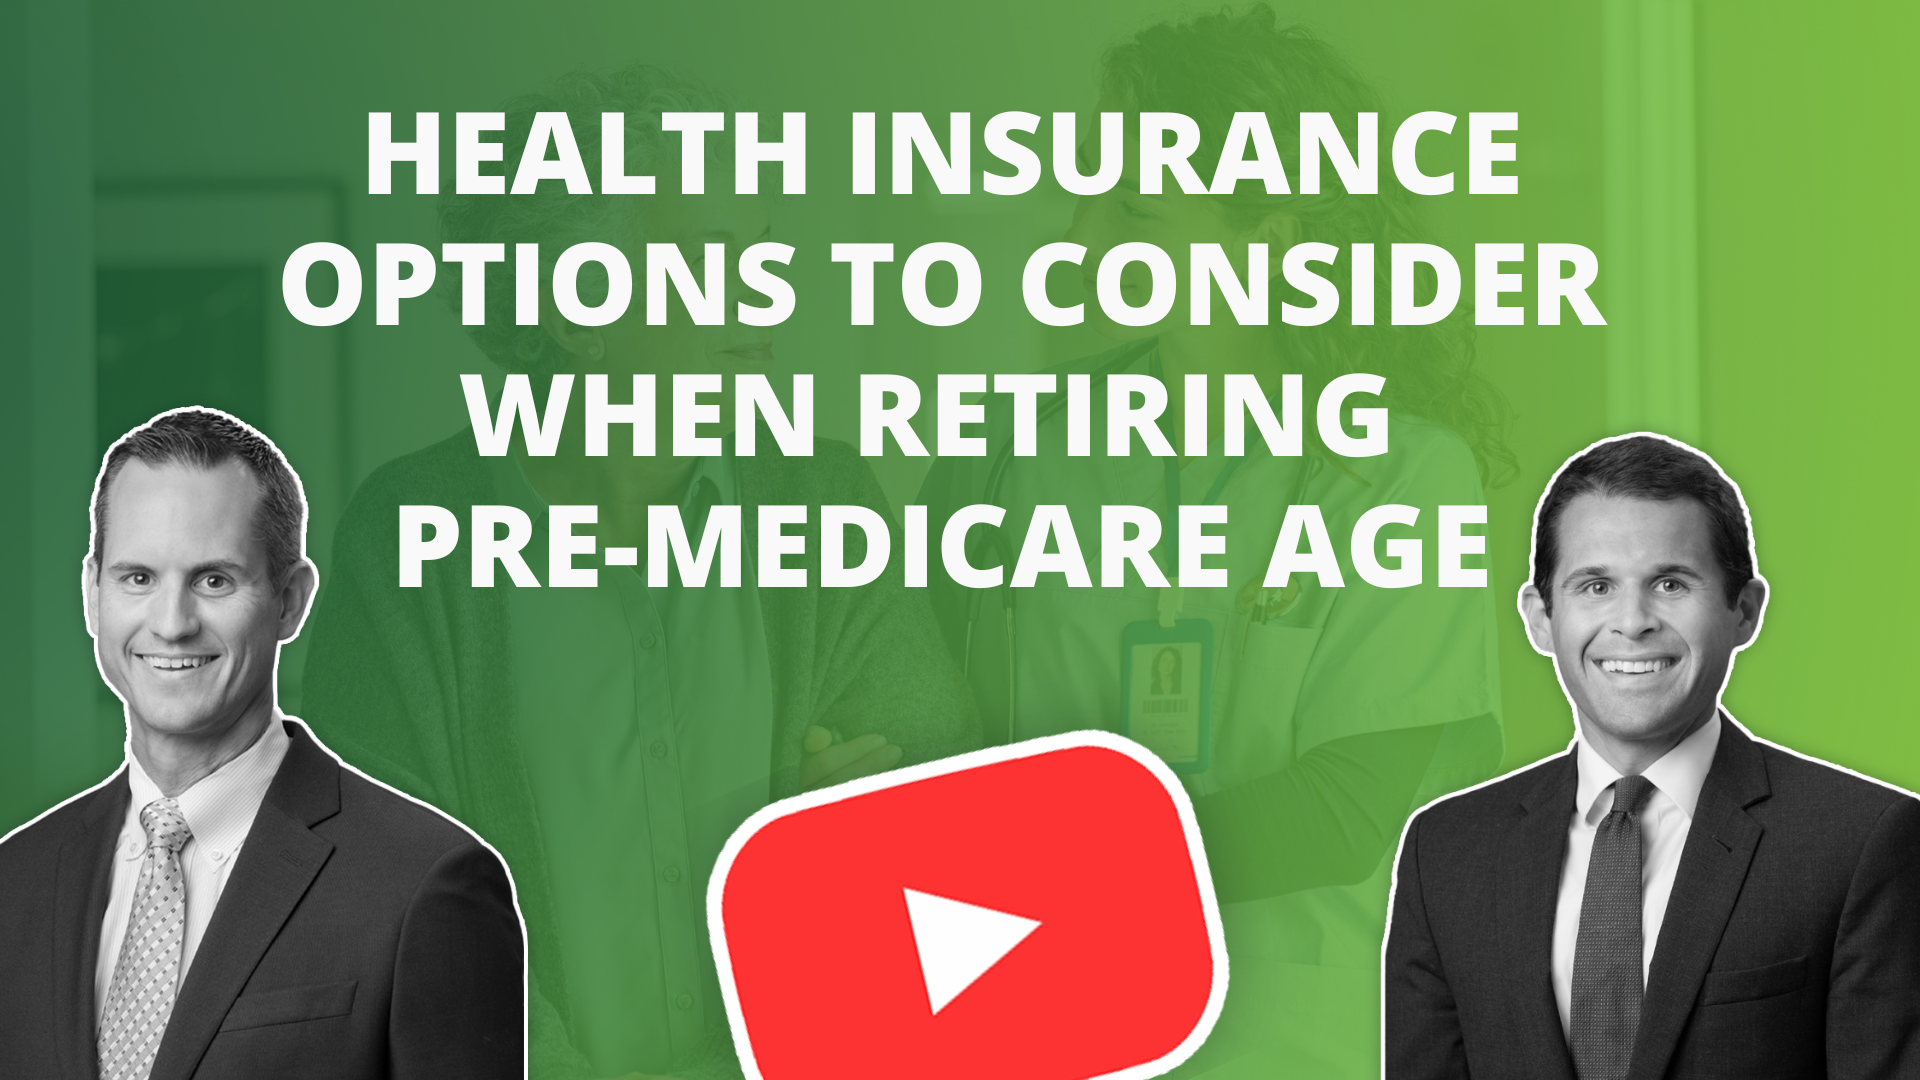 Healthcare insurance options to consider when retiring pre-medicare age